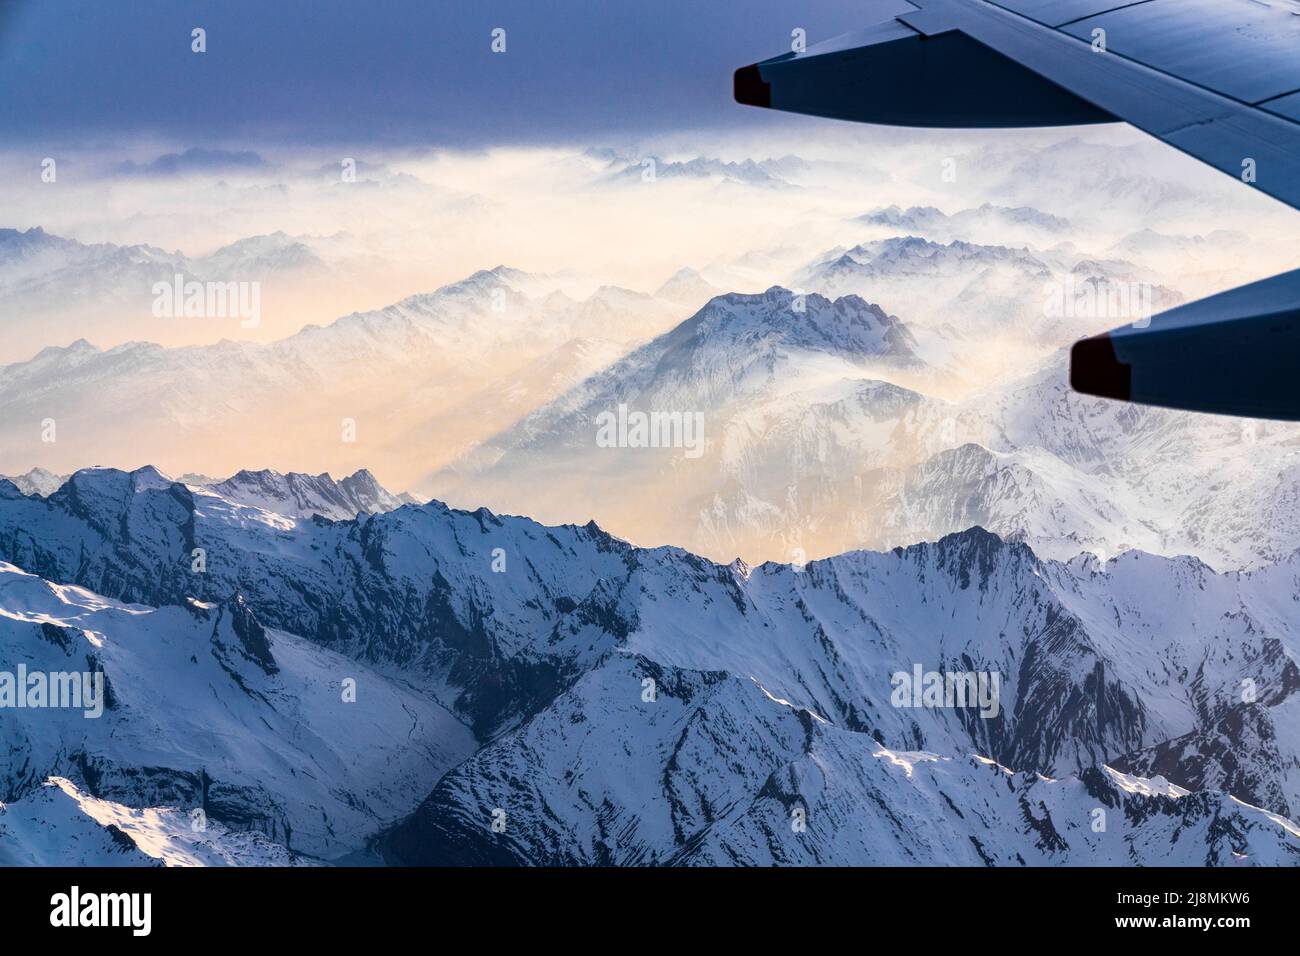 Airplane flying over Lepontine and Ticino Alps covered with snow during a foggy sunset, canton of Graubunden, Switzerland Stock Photo